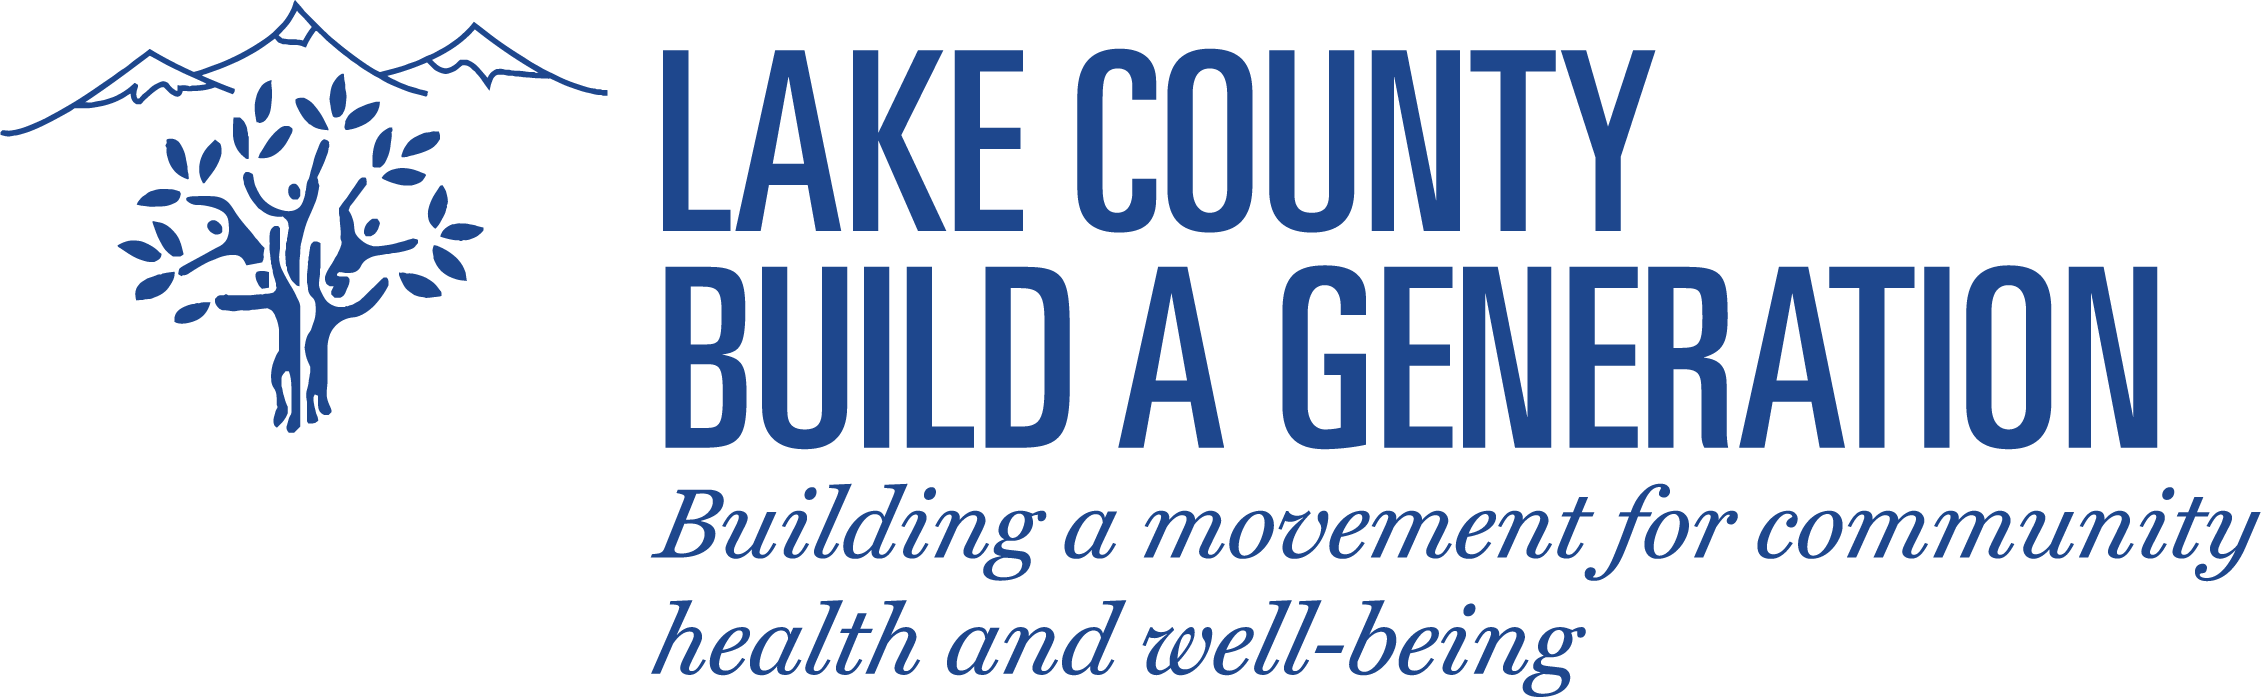 Lake County Build a Generation